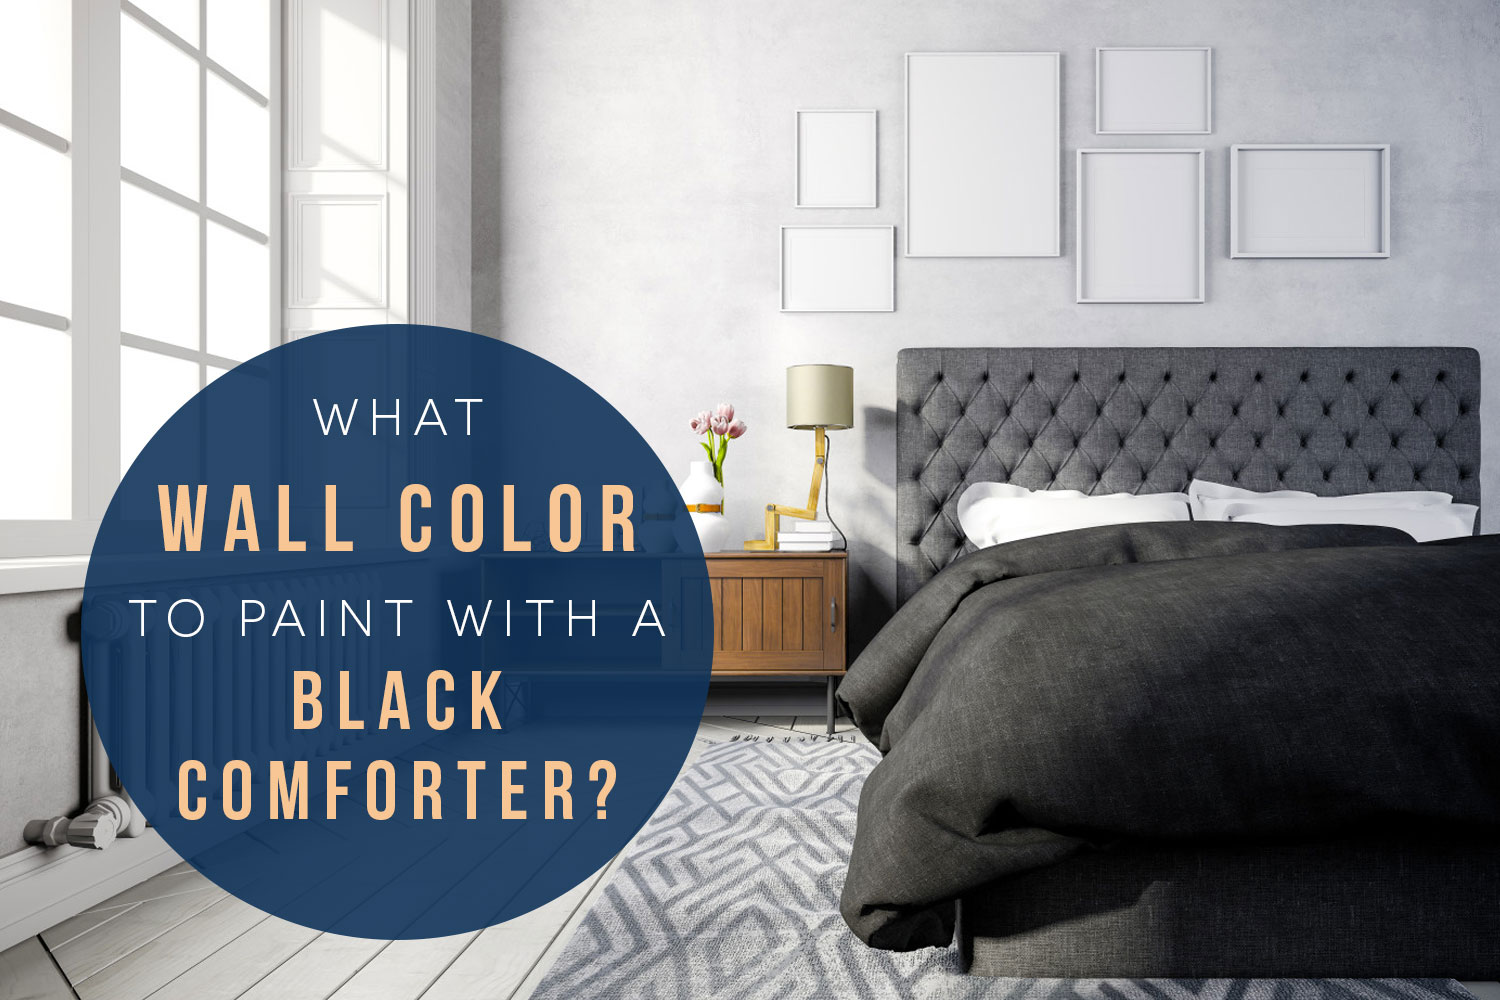 What Wall Color to Paint With a Black Comforter?